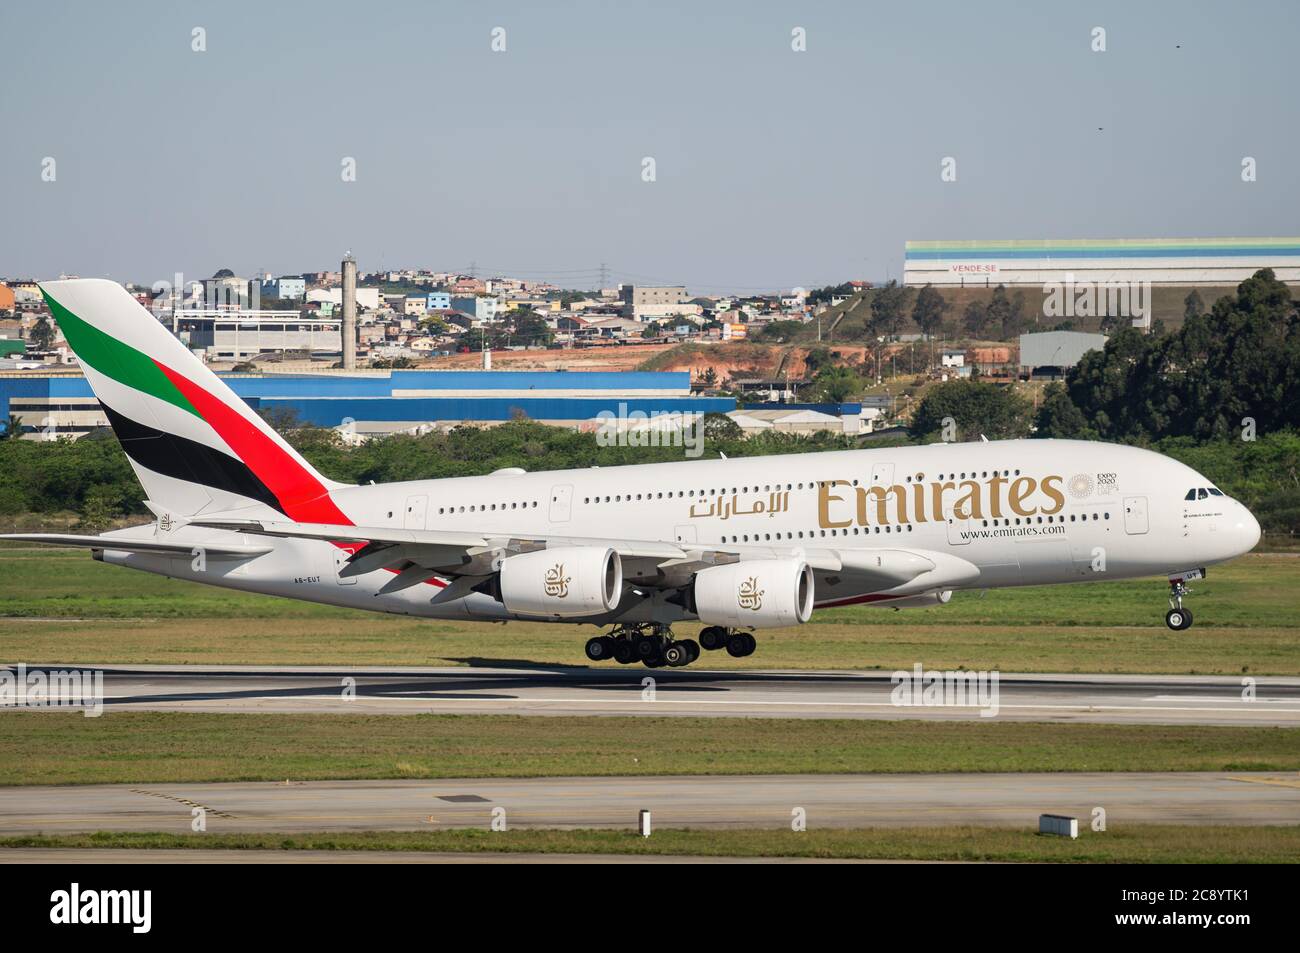 The Emirates Airlines Airbus A380-800 (Wide-body aircraft - Reg. A6-EUT) almost touching down runway 27R of Sao Paulo/Guarulhos International Airport. Stock Photo